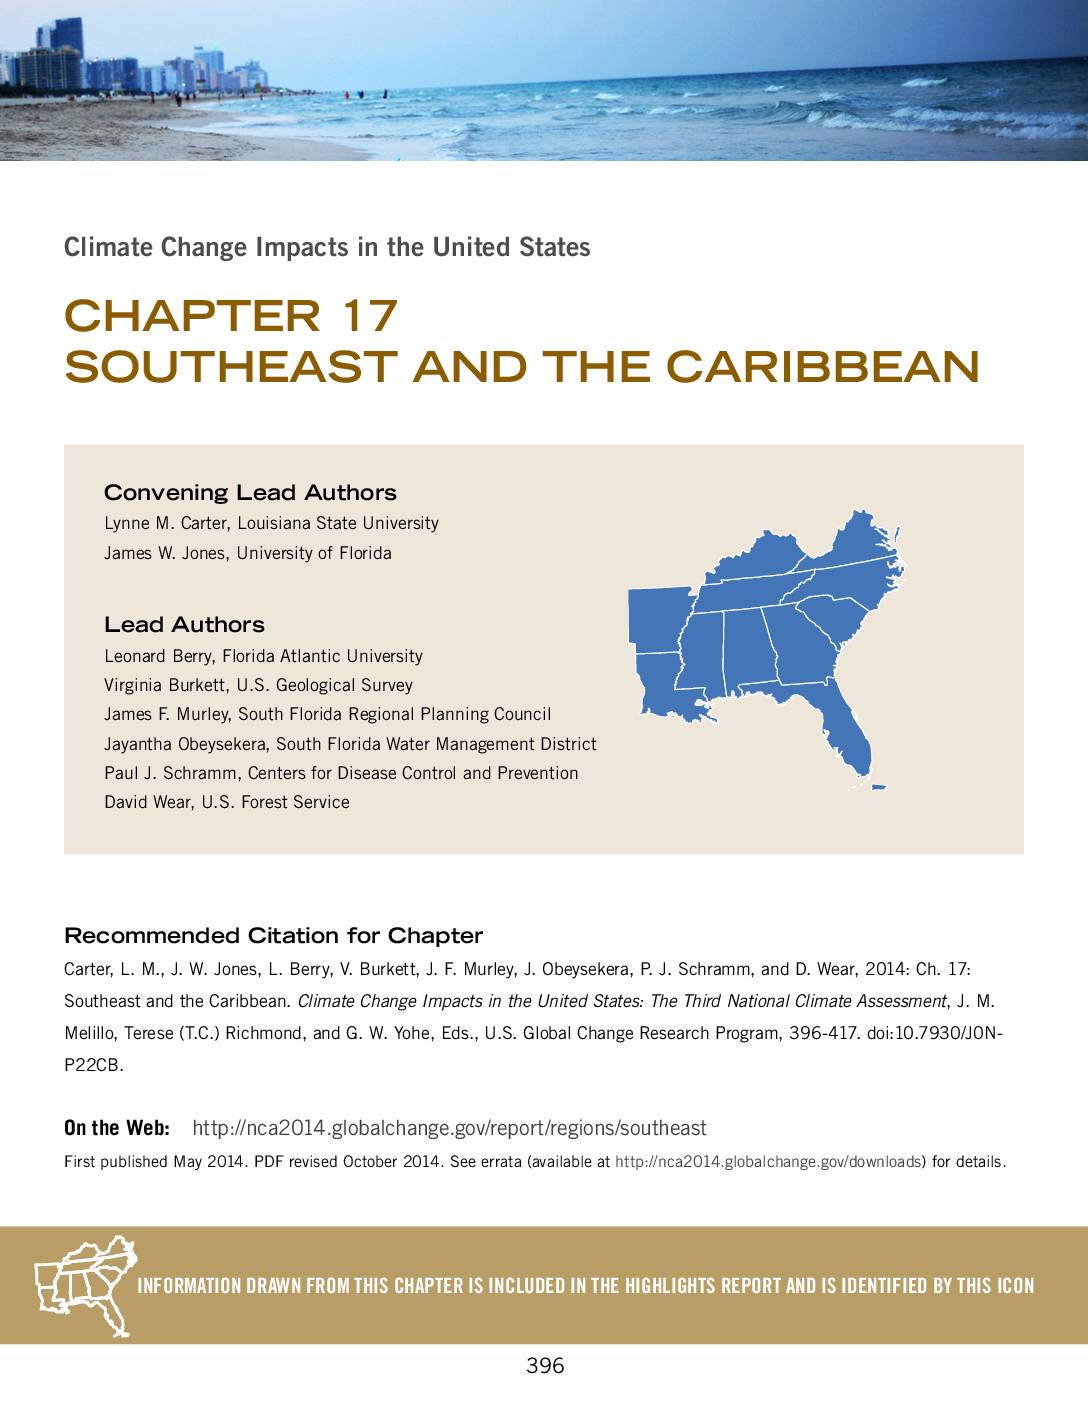 National Climate Assessment: Climate Change Impacts in the Southeast and Carribbean (2014)